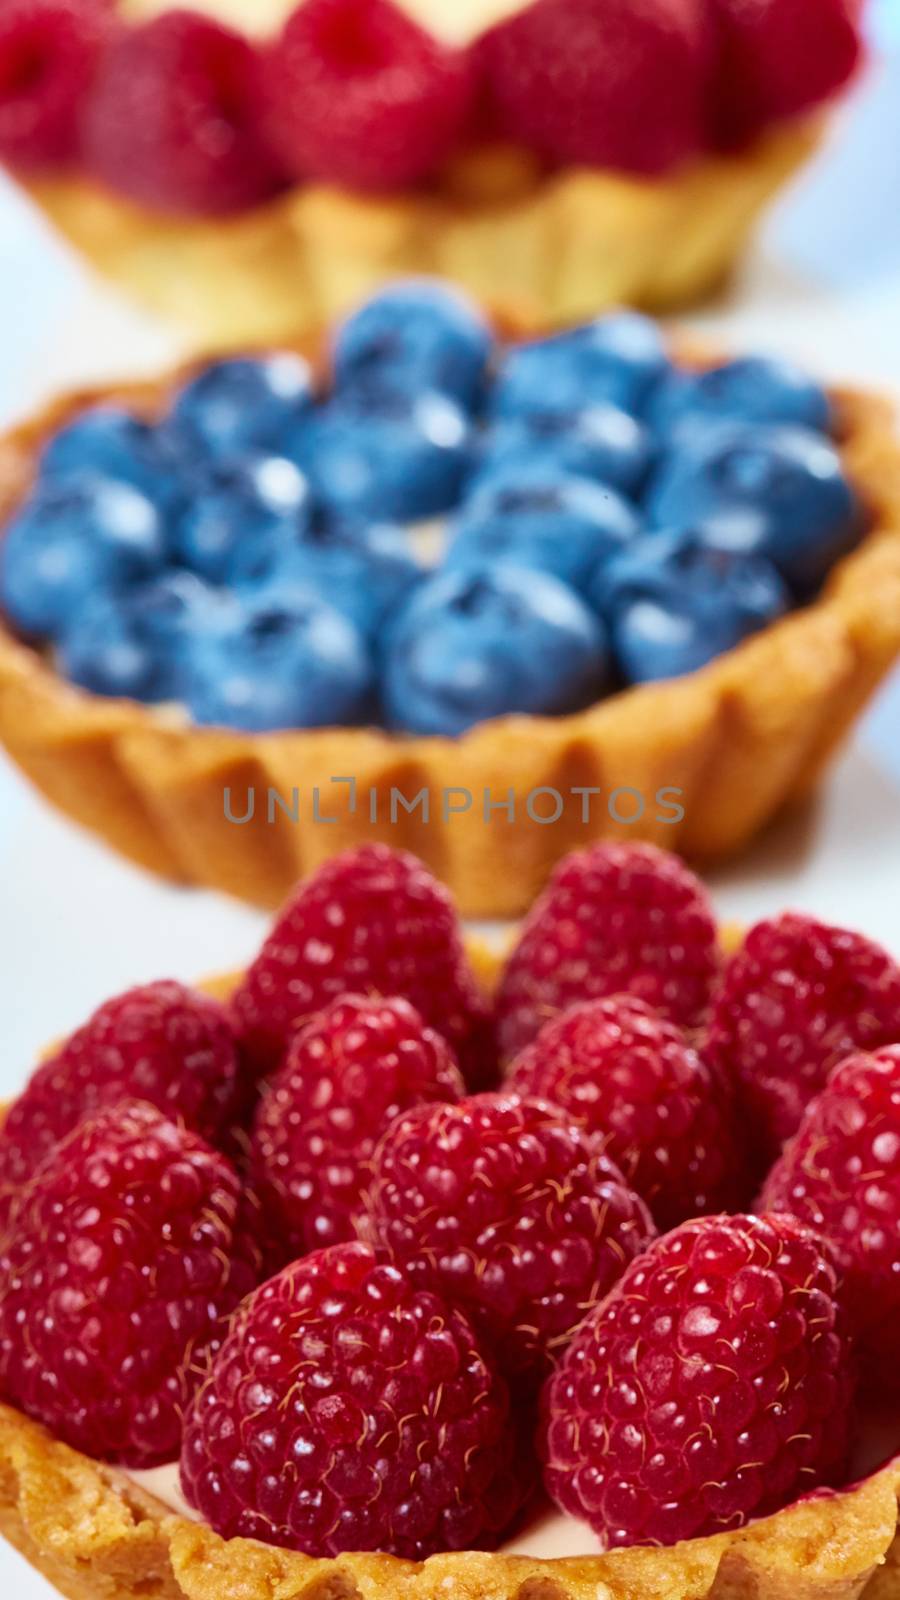 fruit tartlets with raspberries and blueberries. with copy space